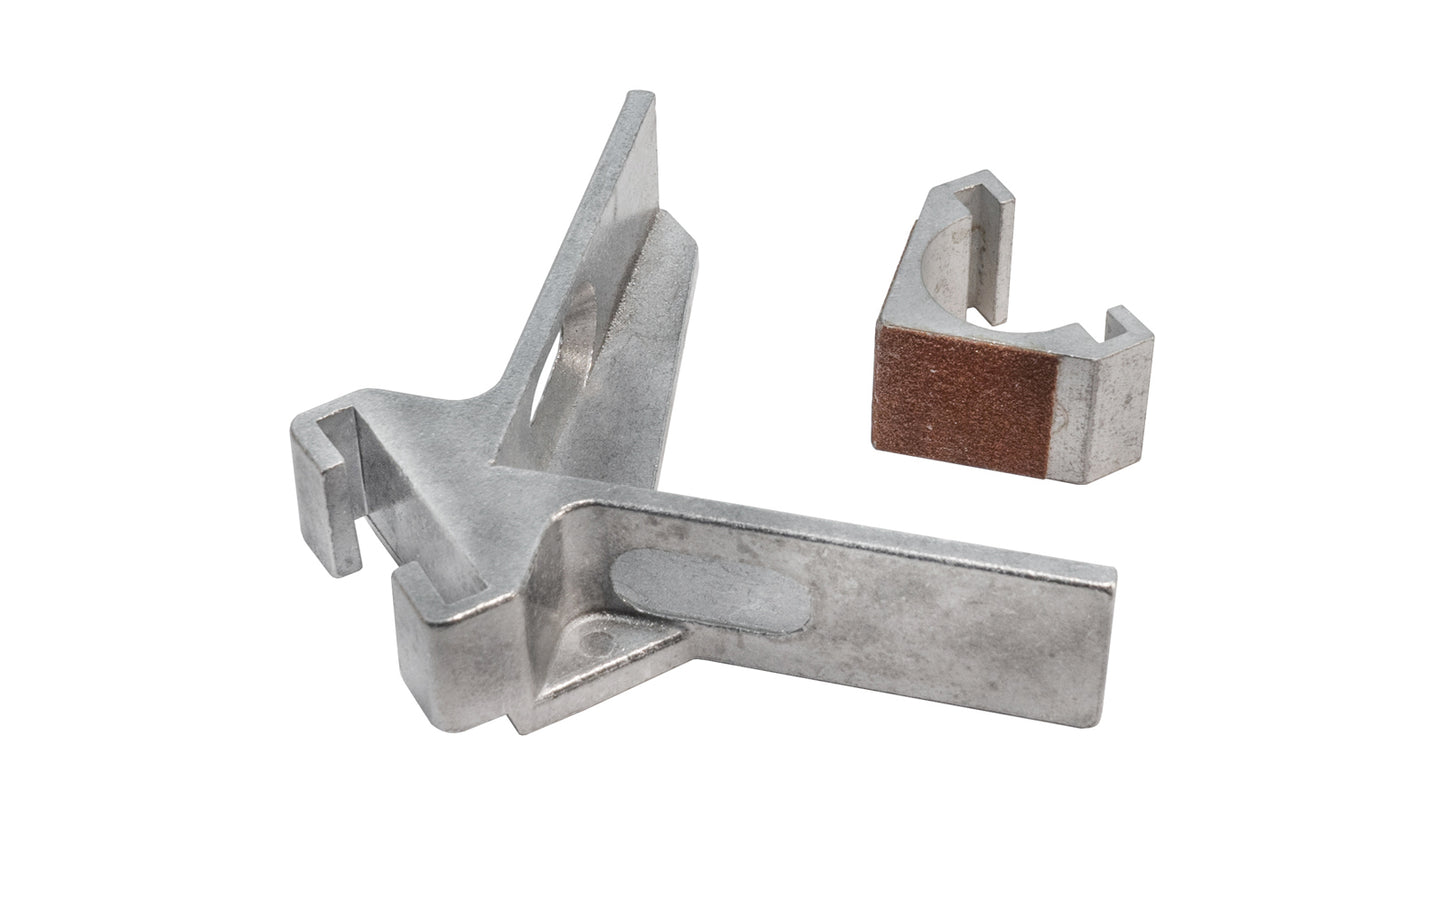 Dubuque Miter Attachment for Aluminum Bar Clamps. Enables for clamping 45° angles with Dubuque Series UC-900 Aluminum Bar Clamps. Encludes (1) outside & (1) inside miter attachments. Dubuque "Miro Moose". Model UC905A ~ Made in USA. 099687009055